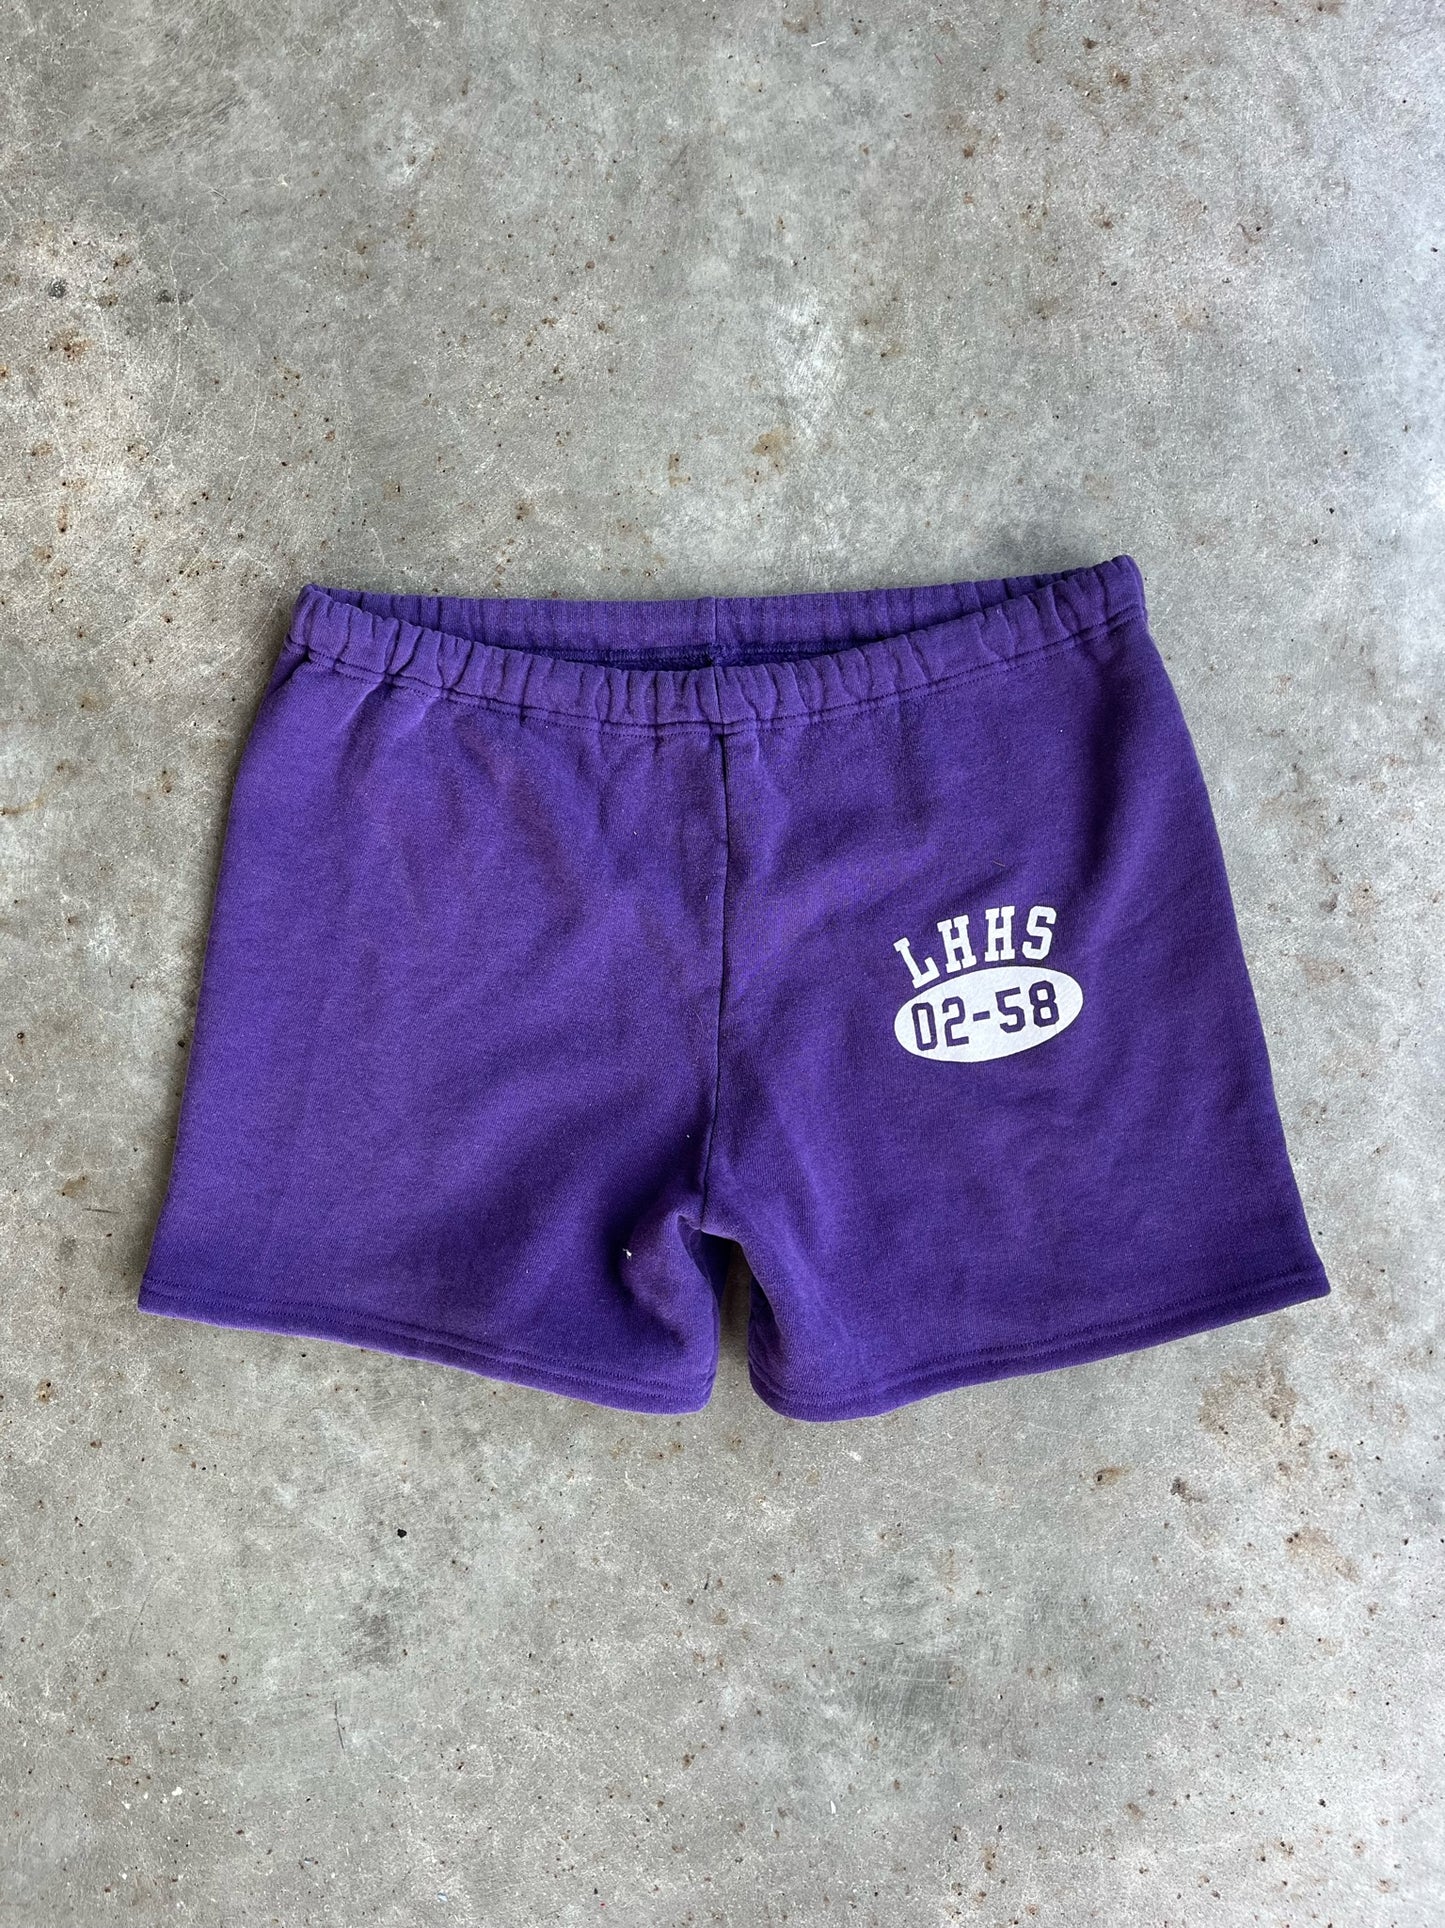 Reworked Russell Athletic Shorts - L